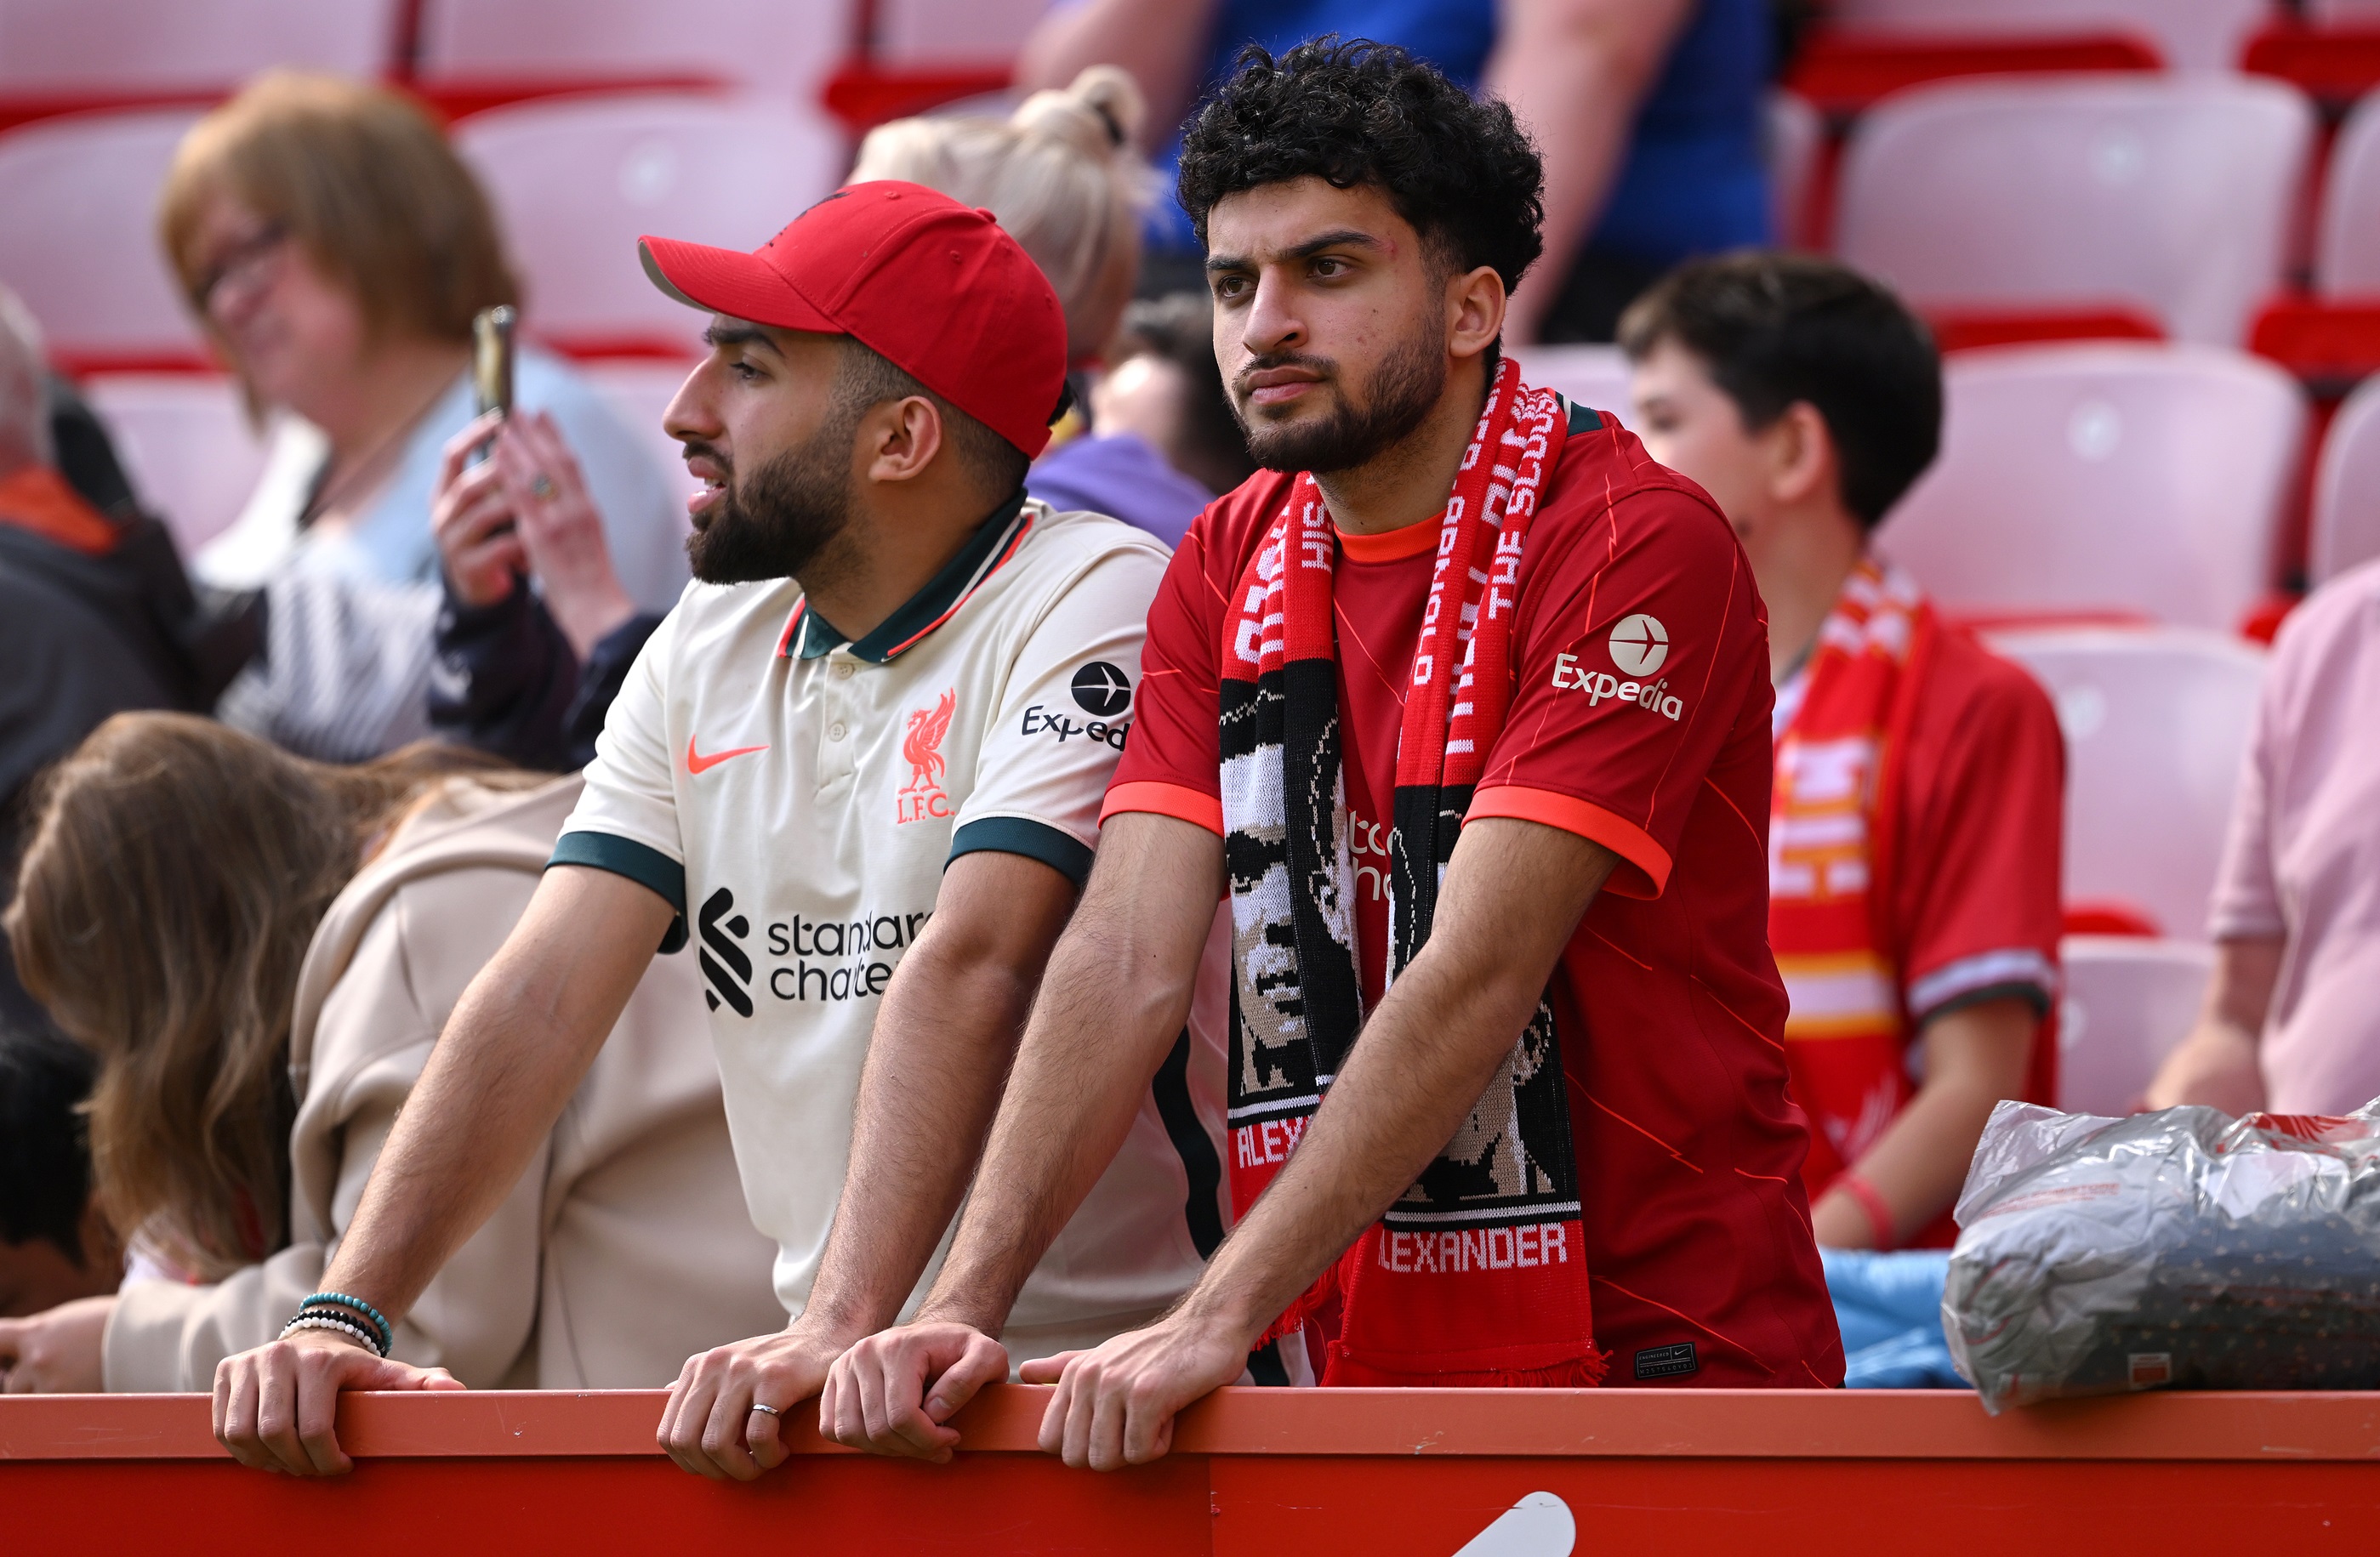 (Image) Fresh stats emerging online explain why Liverpool’s season suddenly derailed